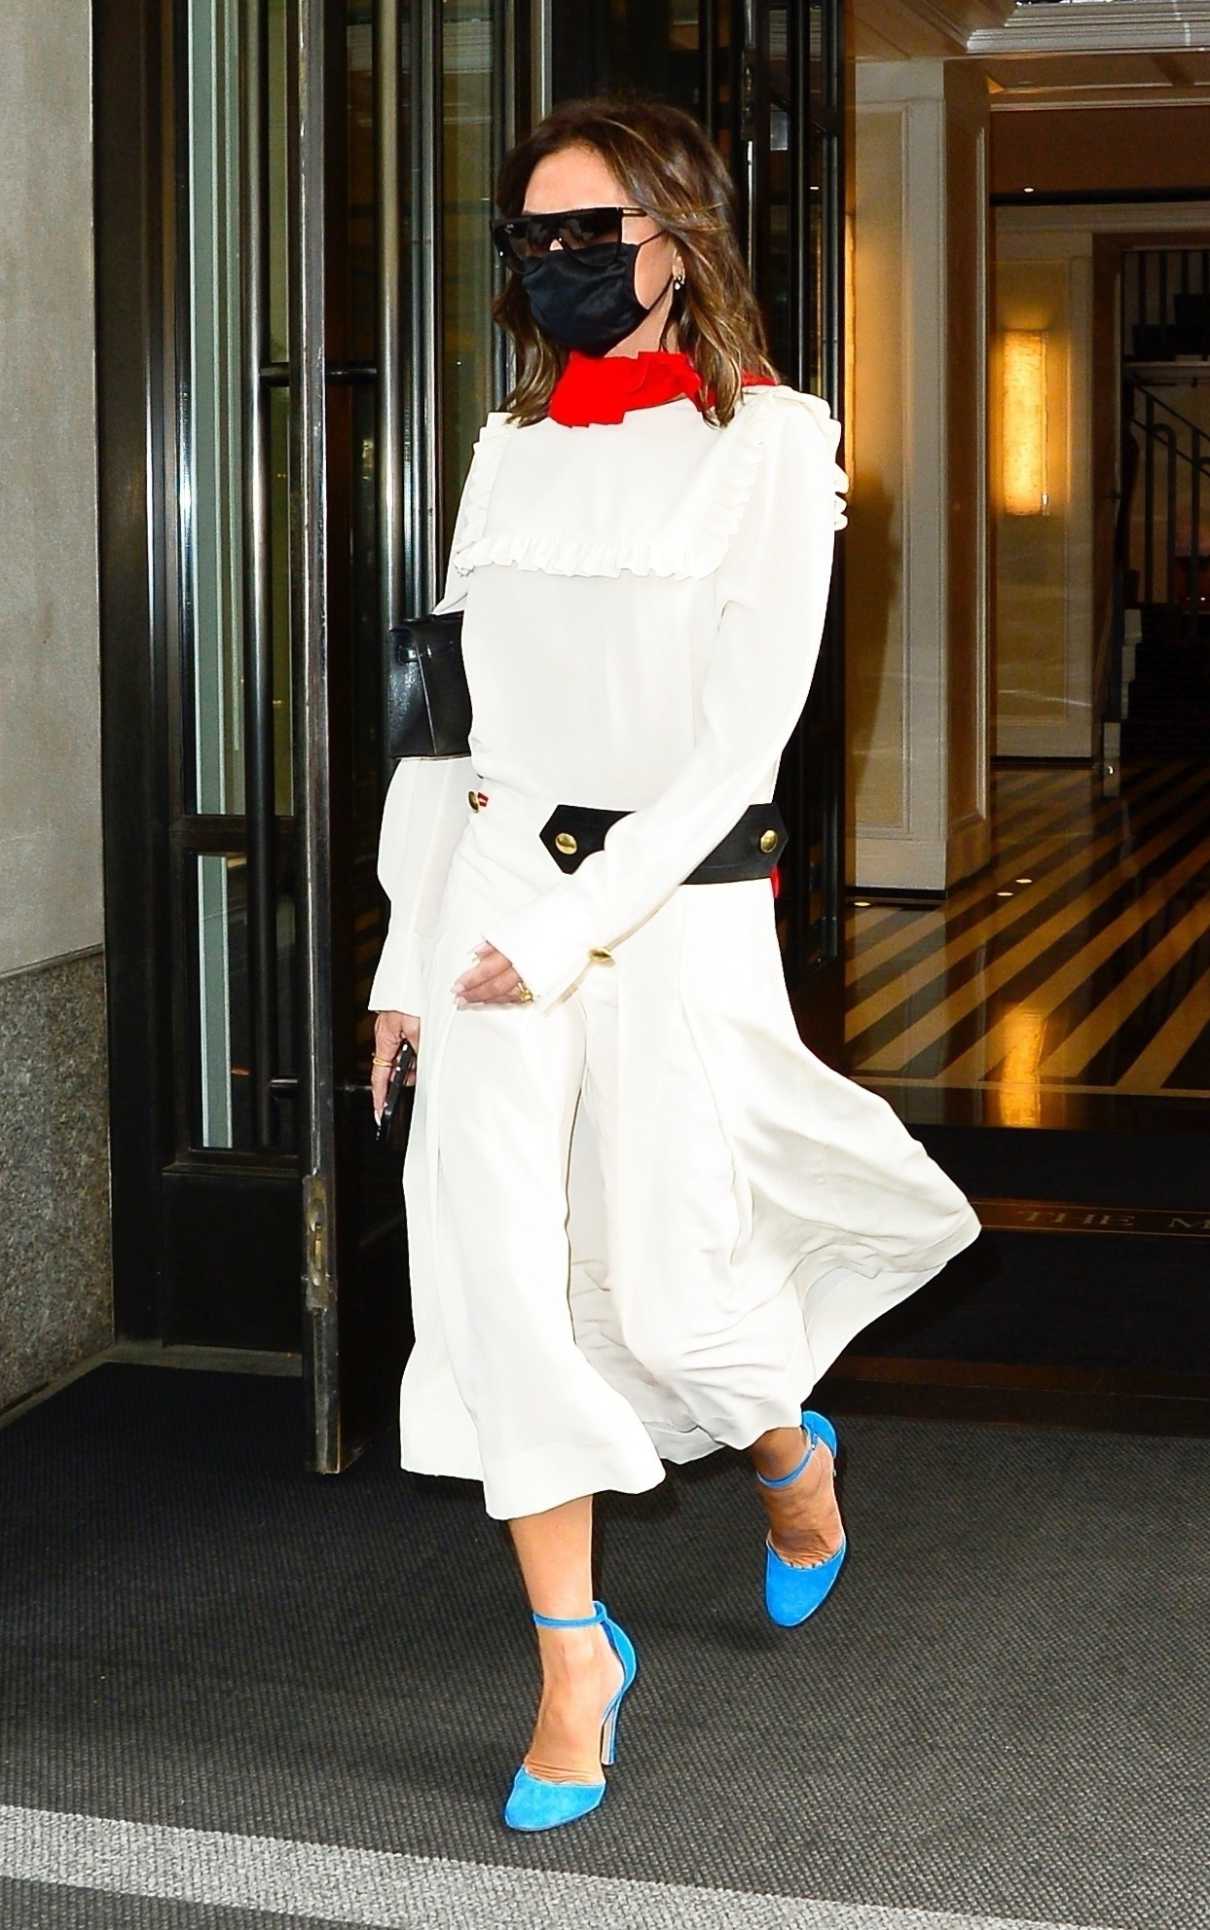 Victoria Beckham in a White Dress Exits Her Hotel in New York 05/25 ...